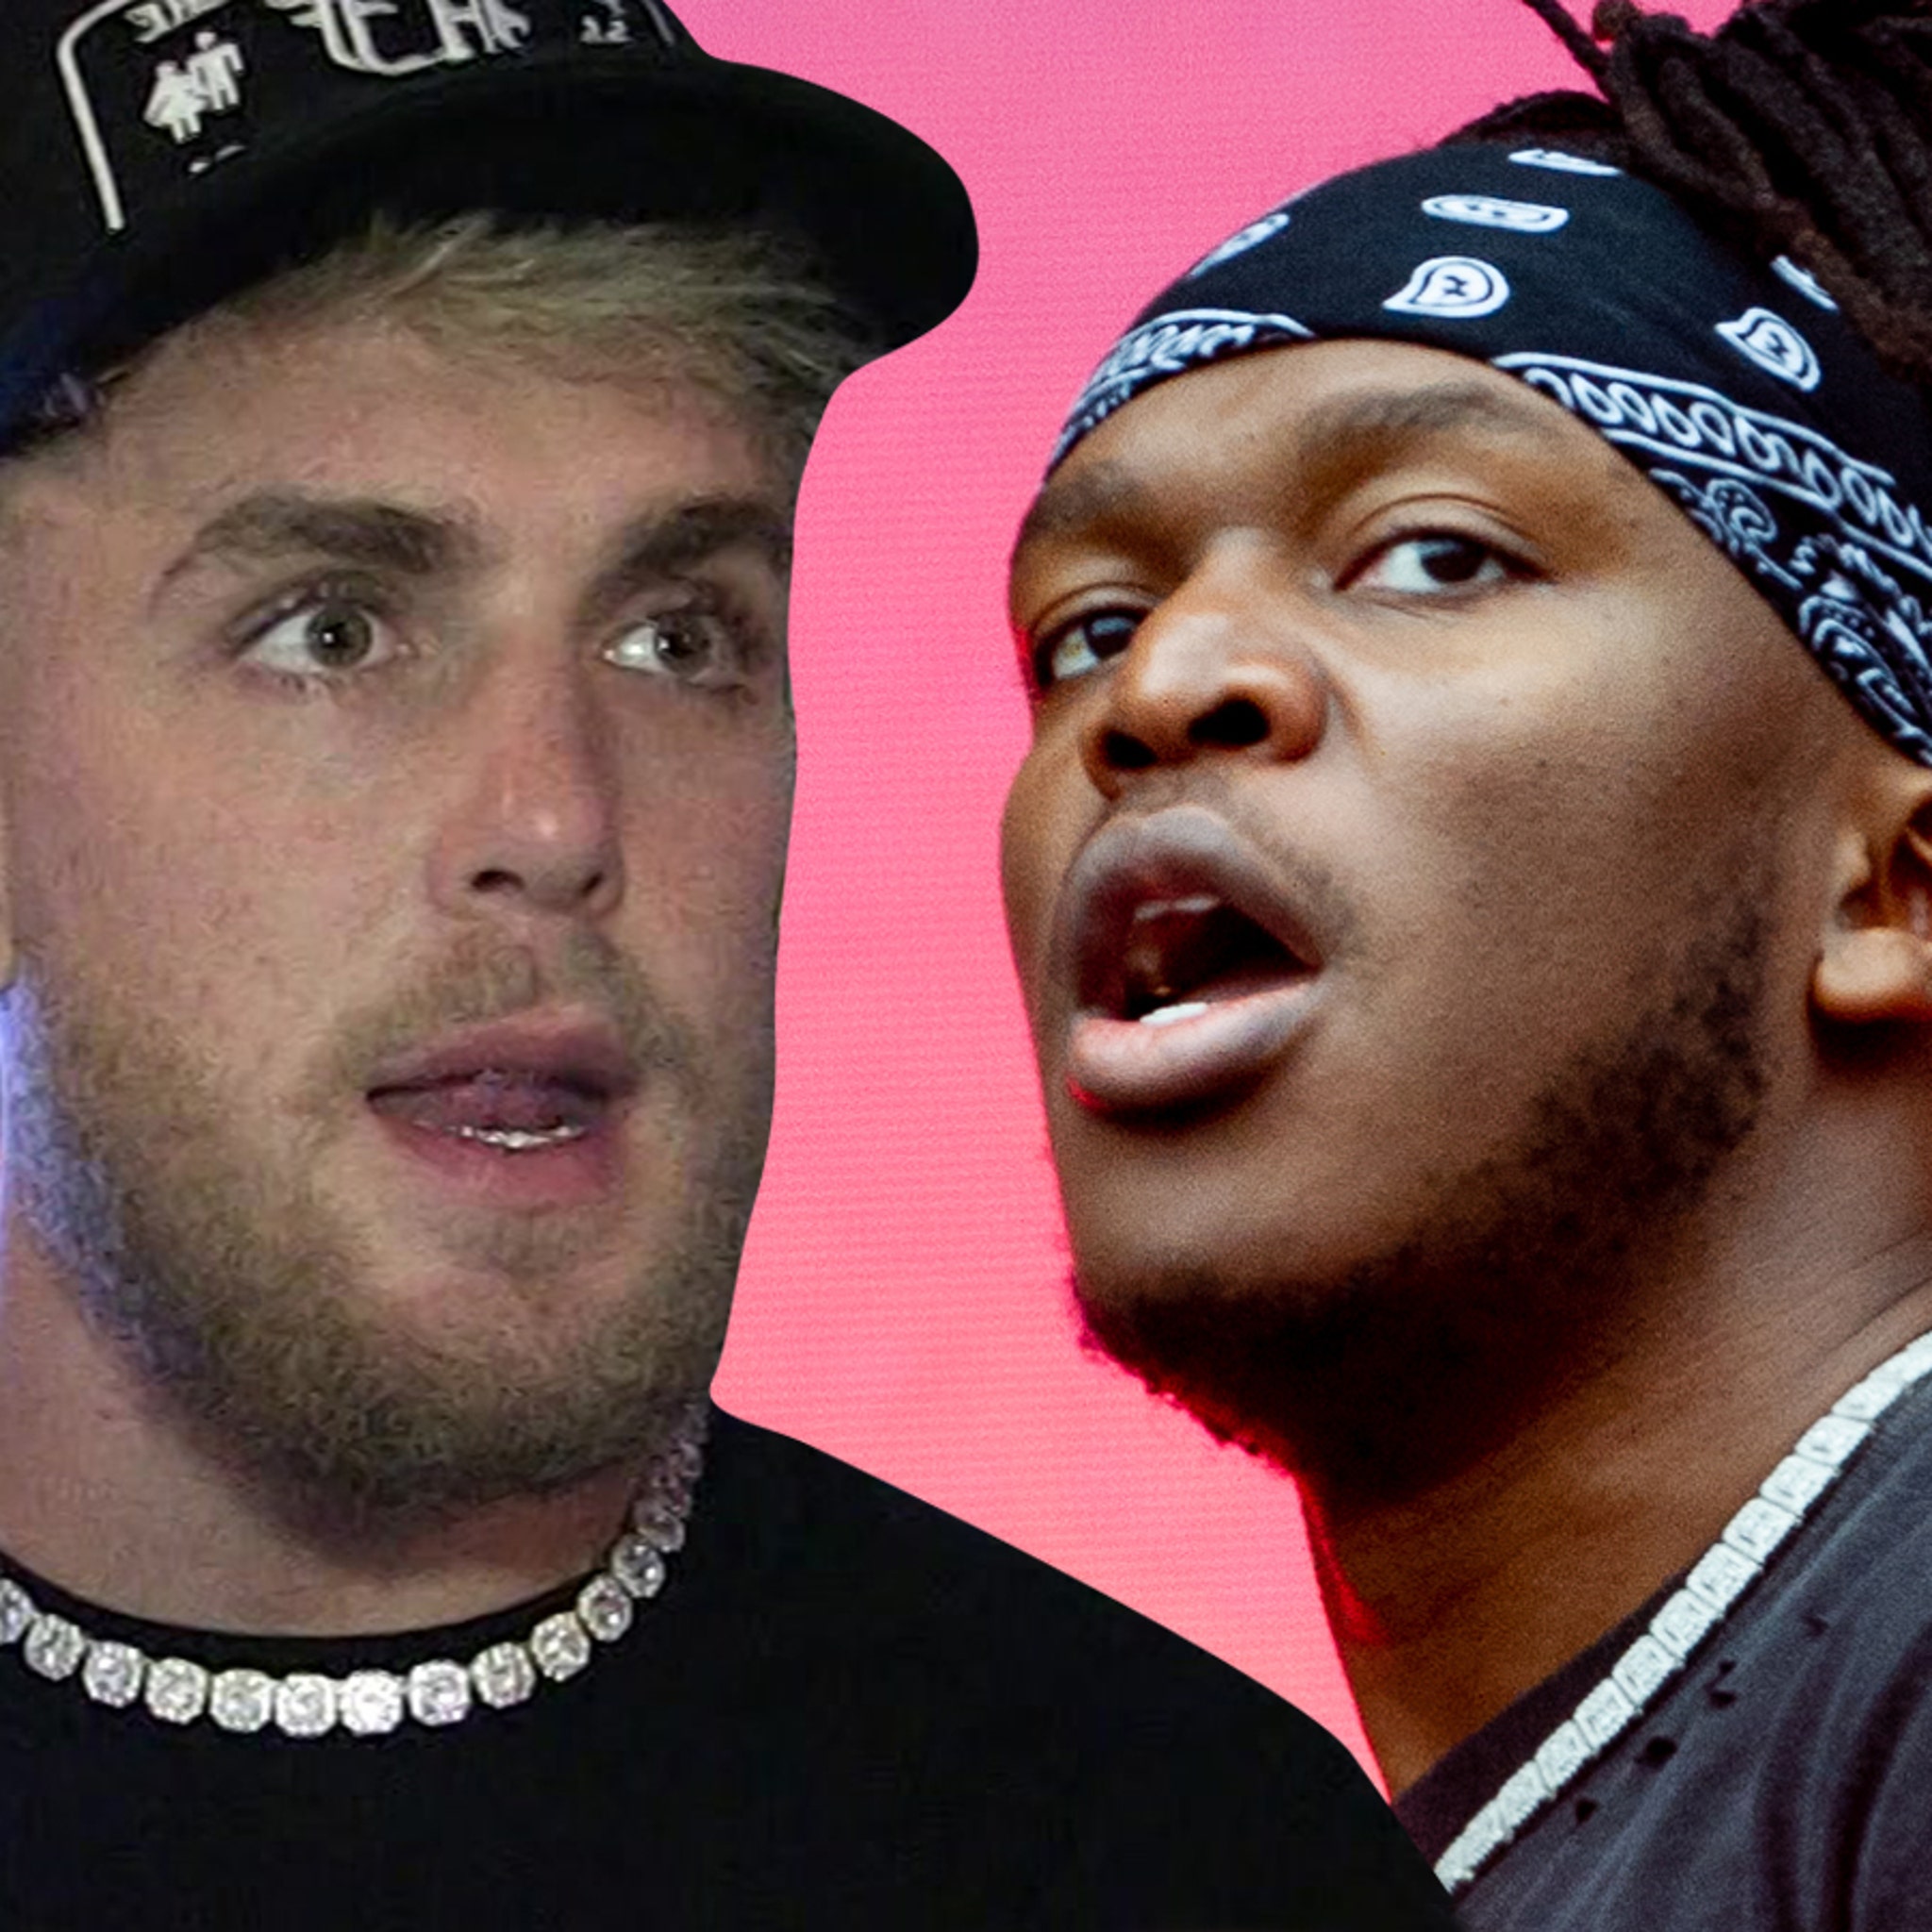 Jake Paul Agrees To Fight KSI At Wembley Stadium In 2023